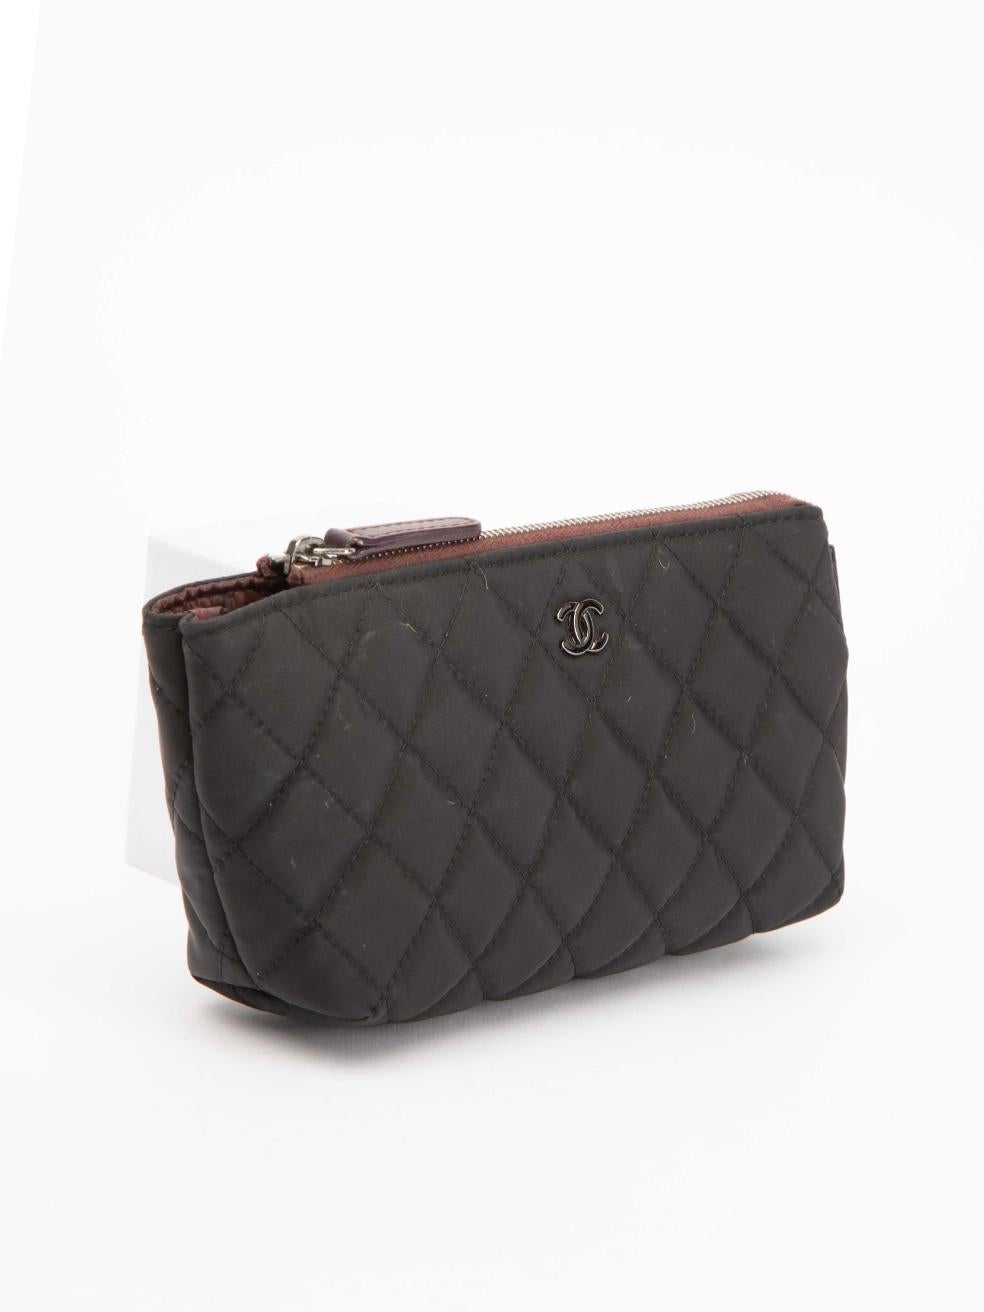 CONDITION is Very good. Minimal wear to pouch is evident. Minimal wear to bag interior which is discoloued from use and, there is also minimal wear to the exterior on this used Chanel designer resale item. 
 
 Details
  Black
 Cloth textile
 Mini